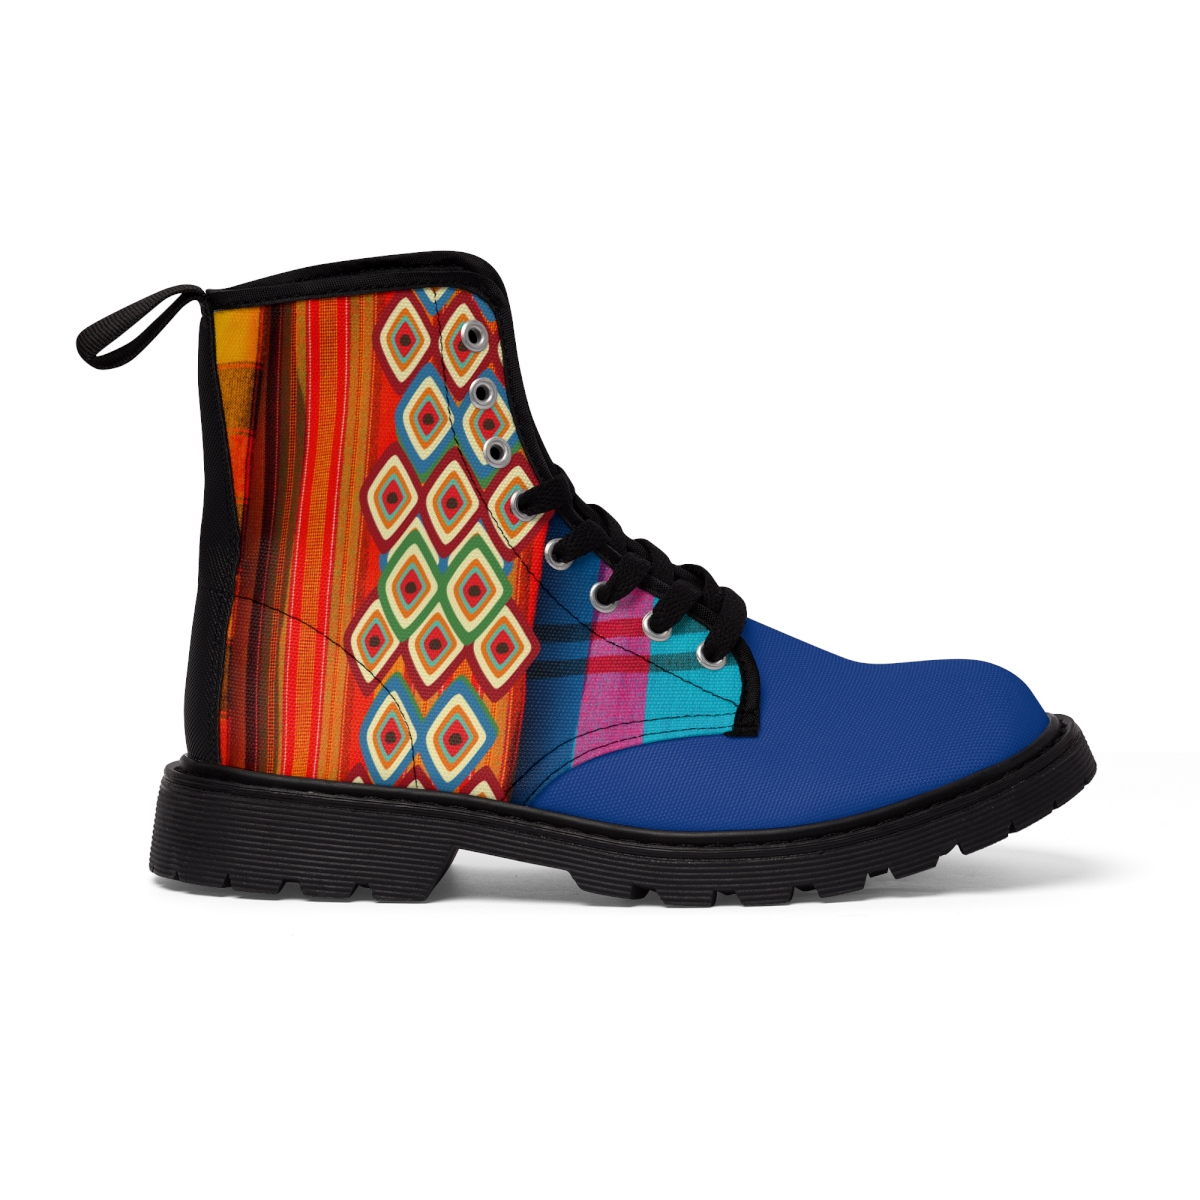 Women's Canvas Boots product thumbnail image